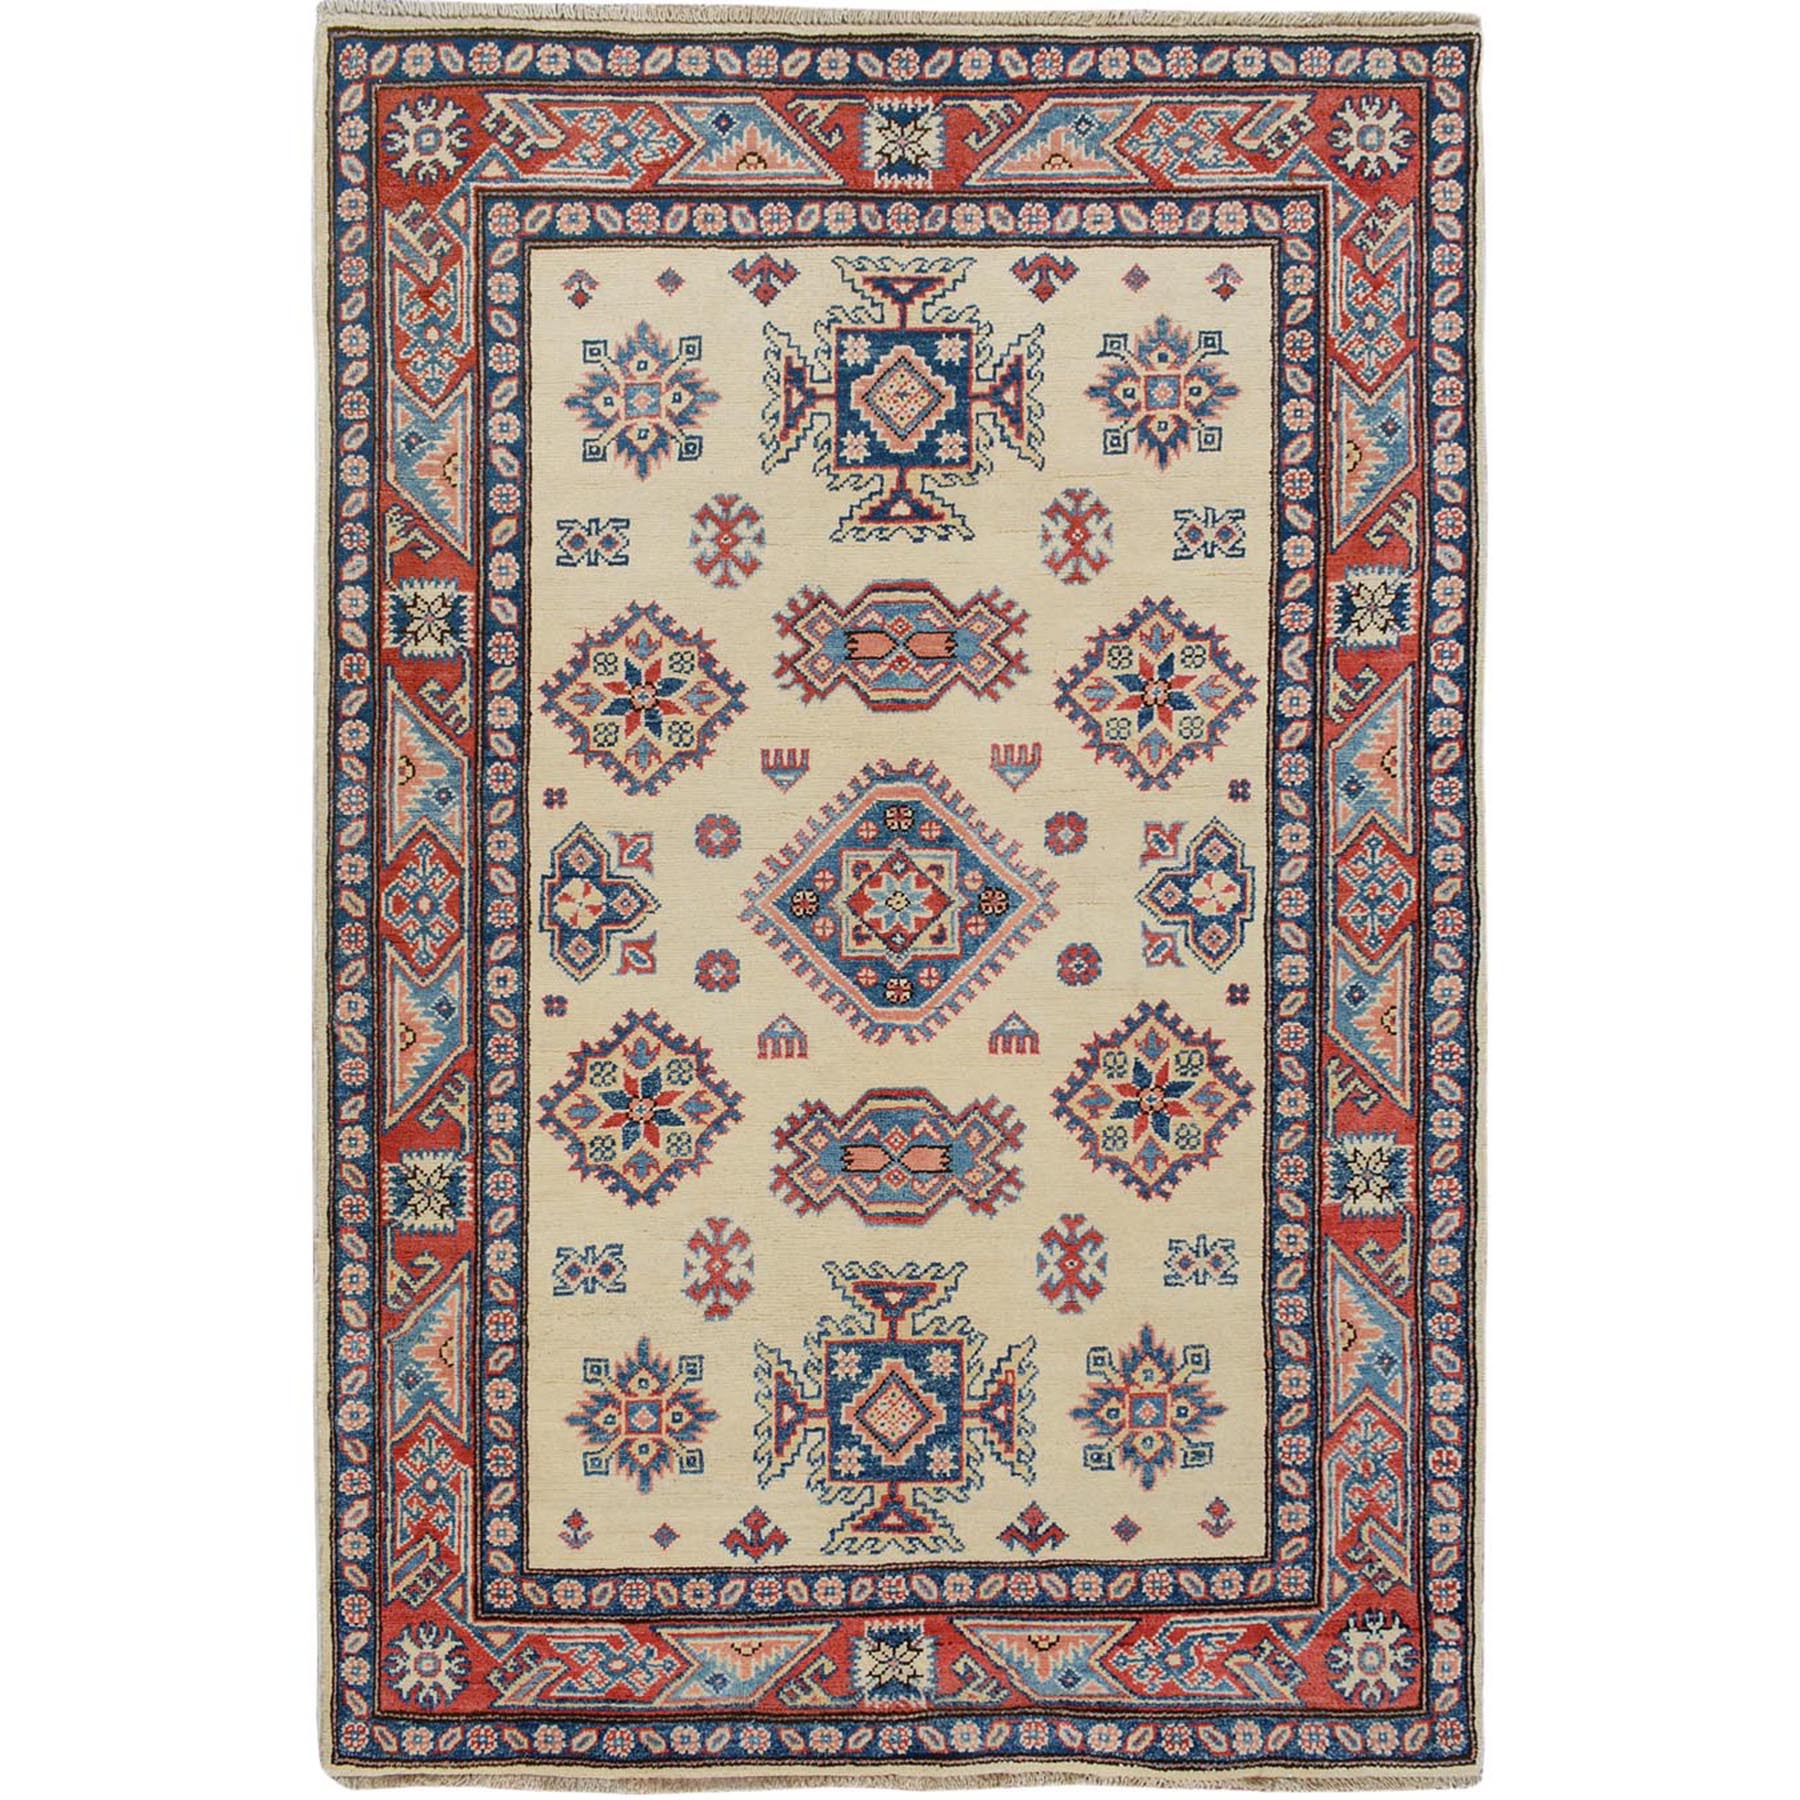 4'X5'7" Ivory Special Kazak Geometric Design Pure Wool Hand Knotted Oriental Rug moae707a